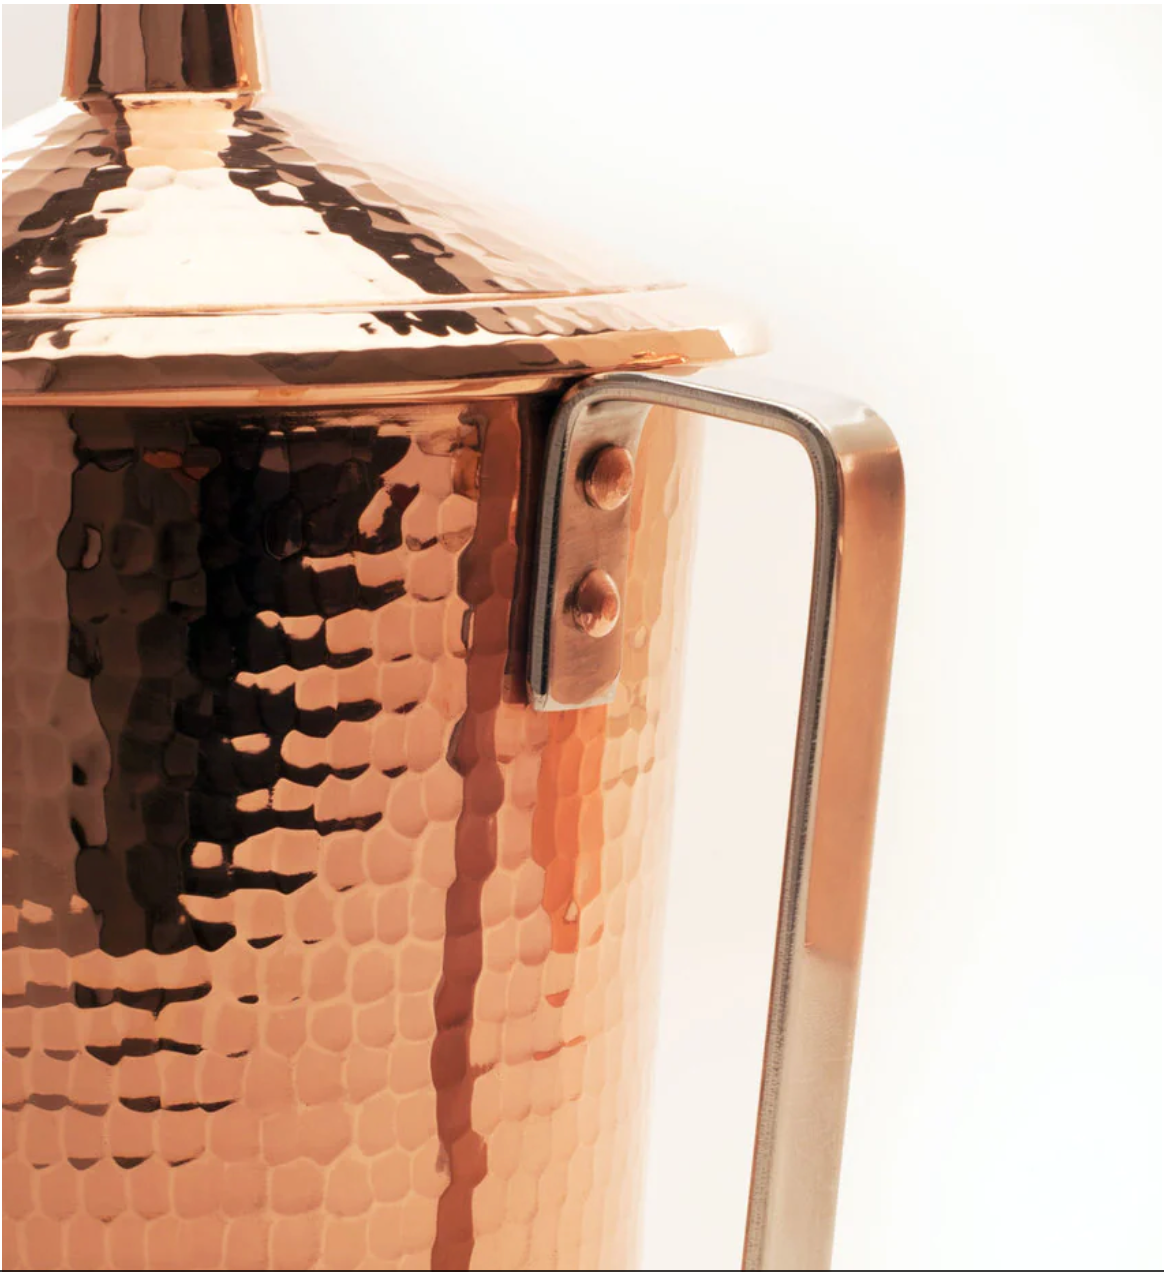 Copper Water Pitcher with Lid